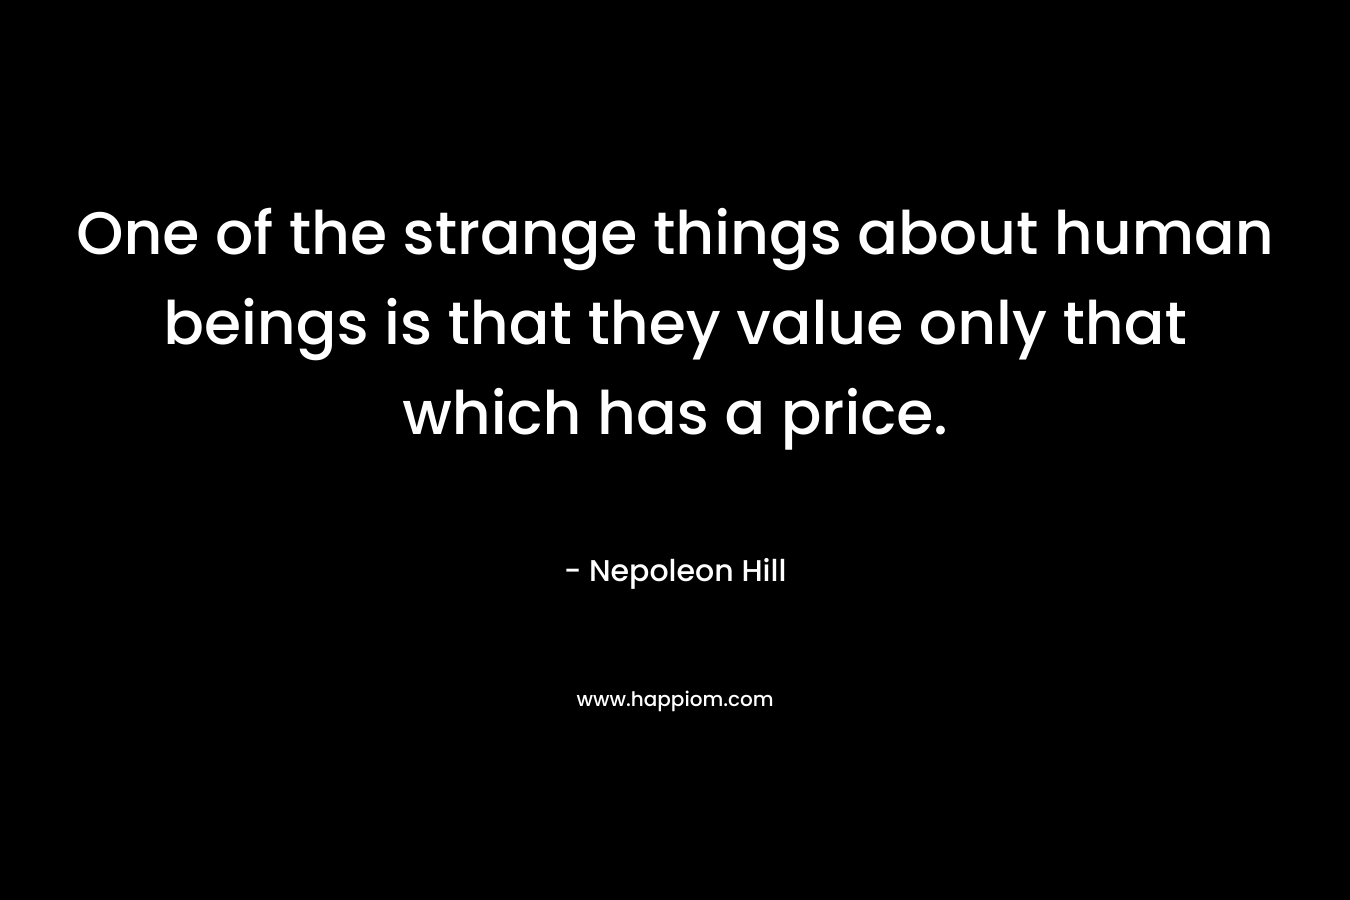 One of the strange things about human beings is that they value only that which has a price.